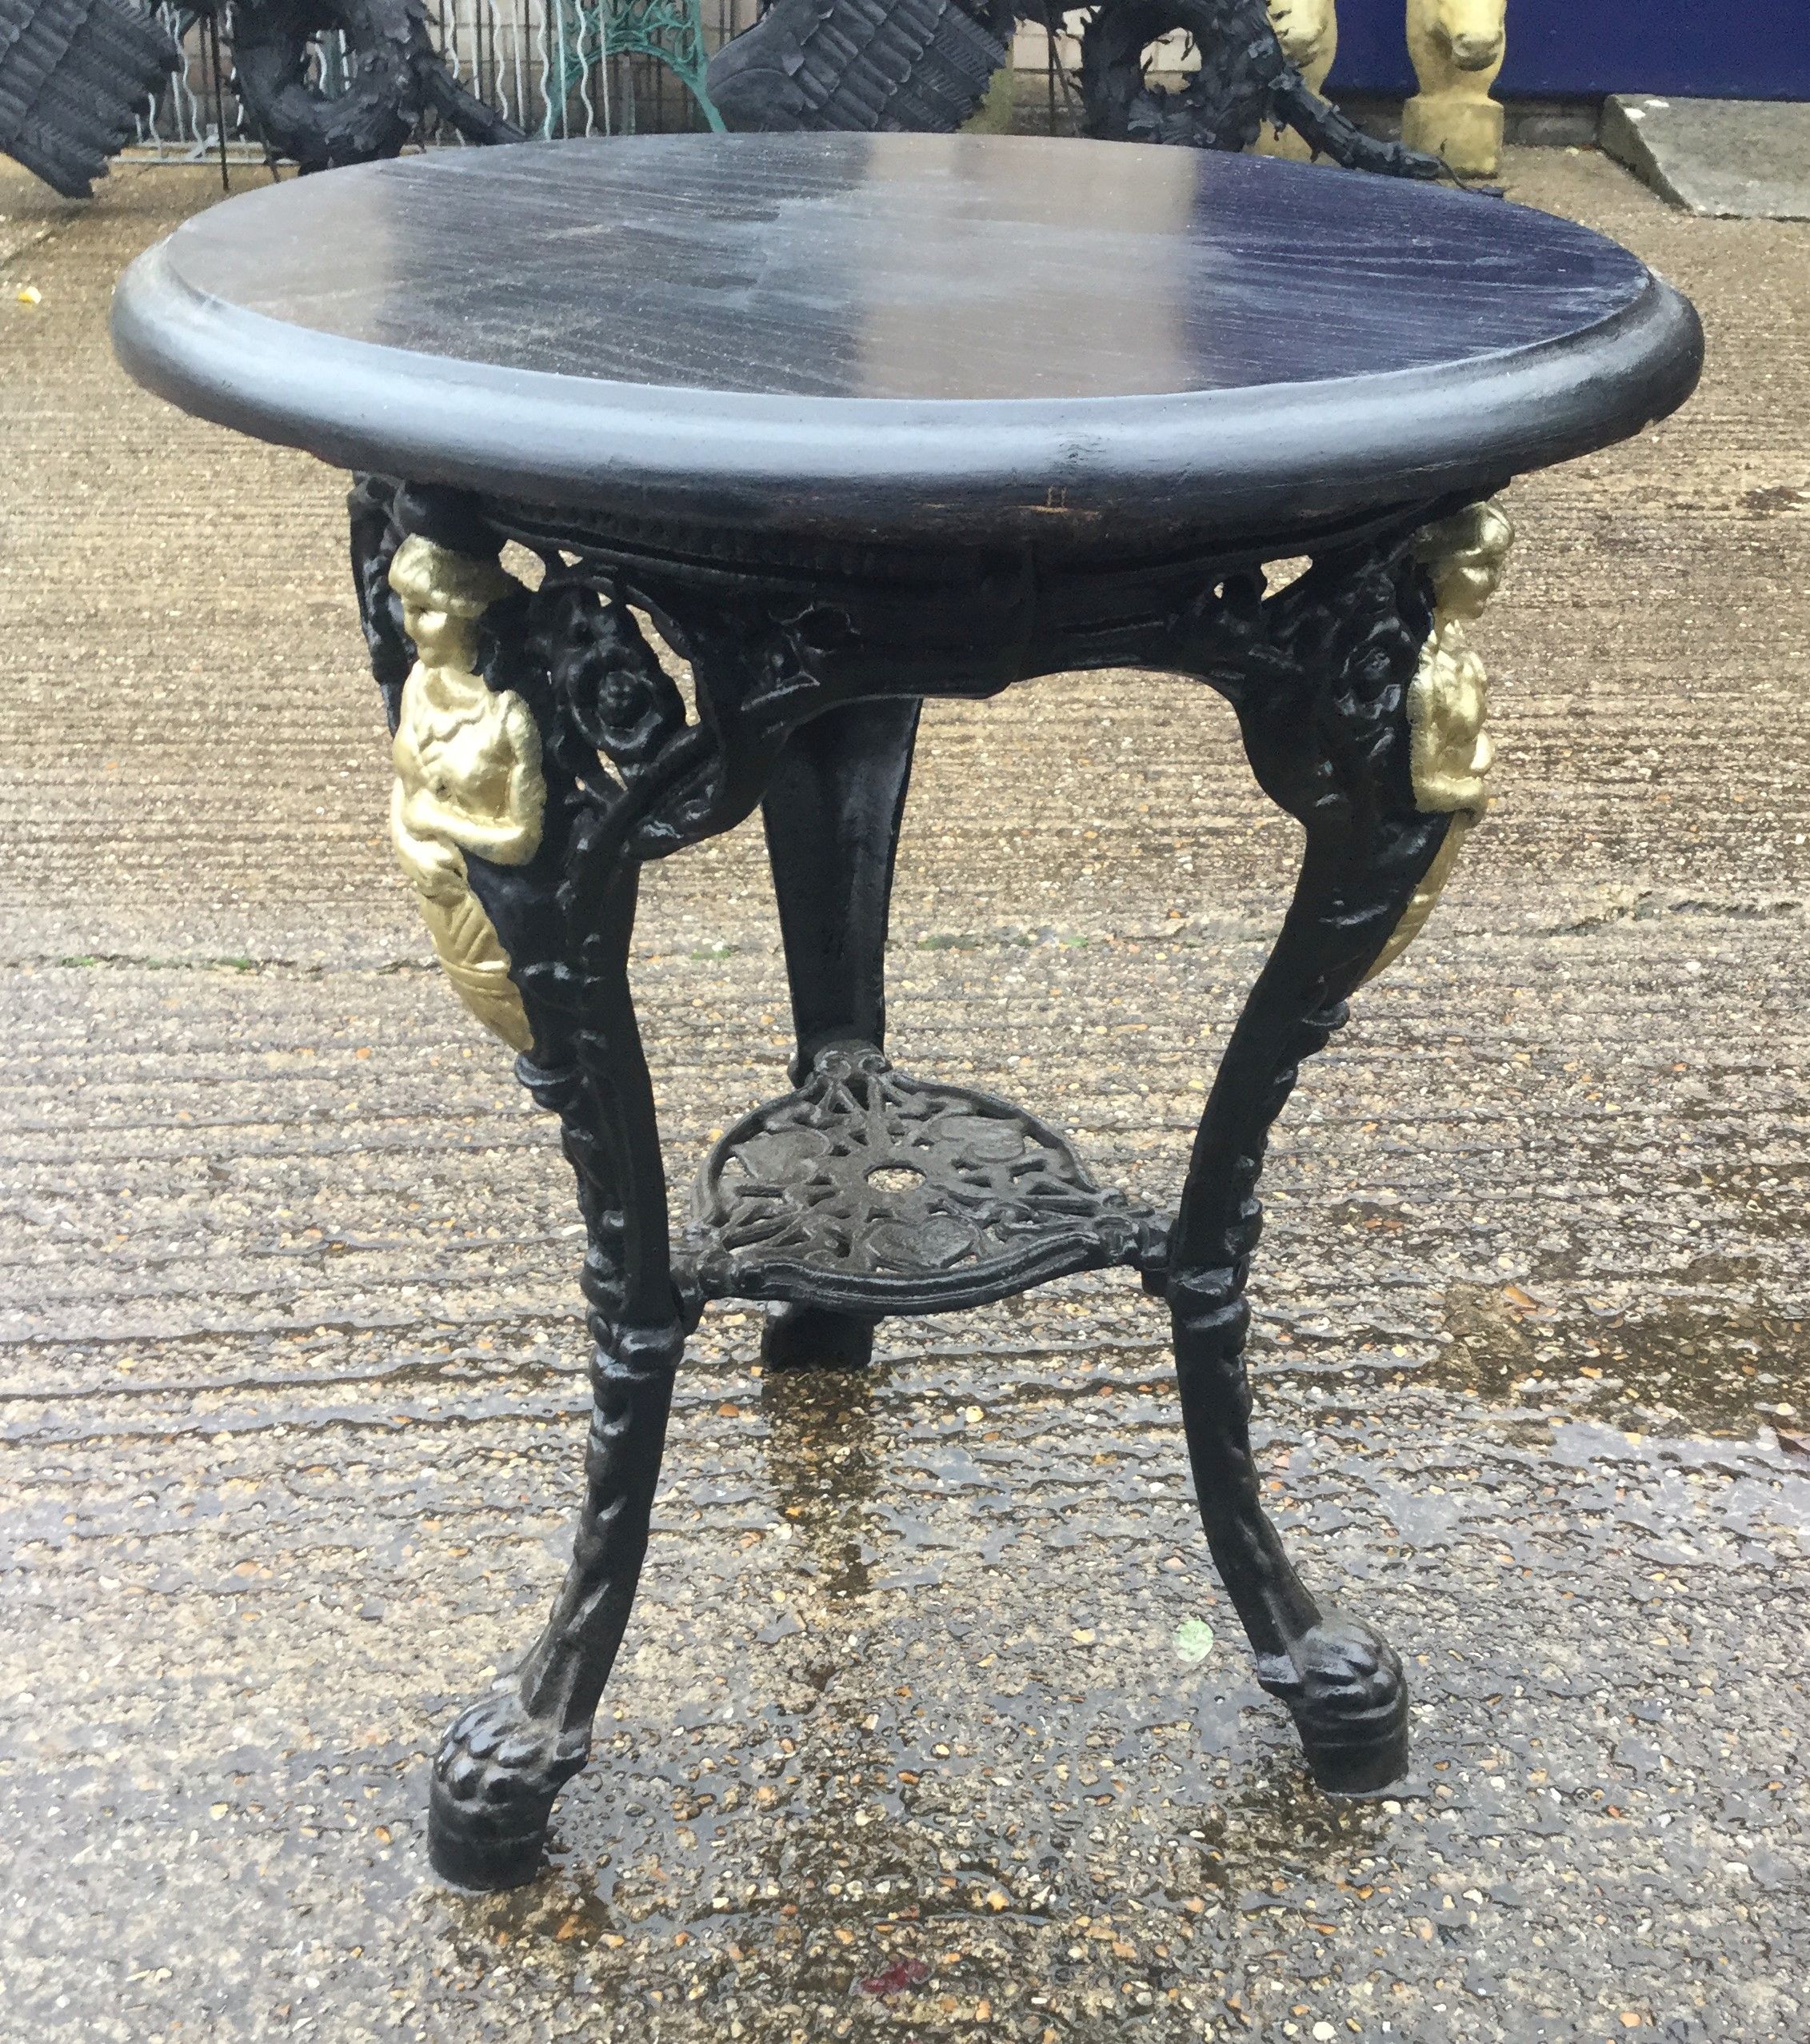 A wooden topped cast iron pub table. 59 cm diameter. - Image 2 of 3